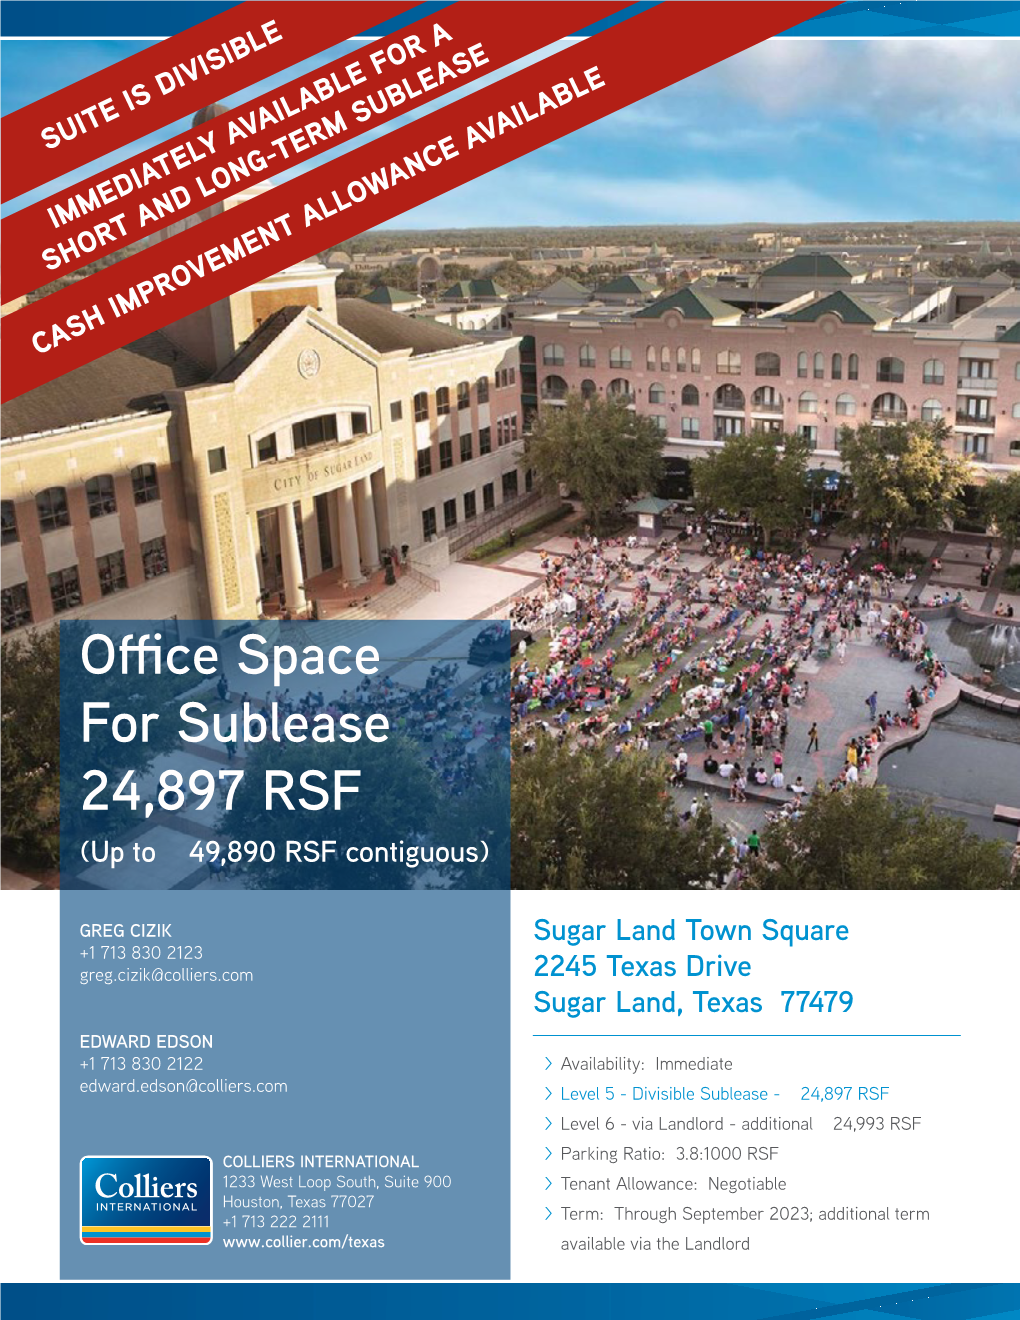 Office Space for Sublease 24,897 RSF (Up to ± 49,890 RSF Contiguous)